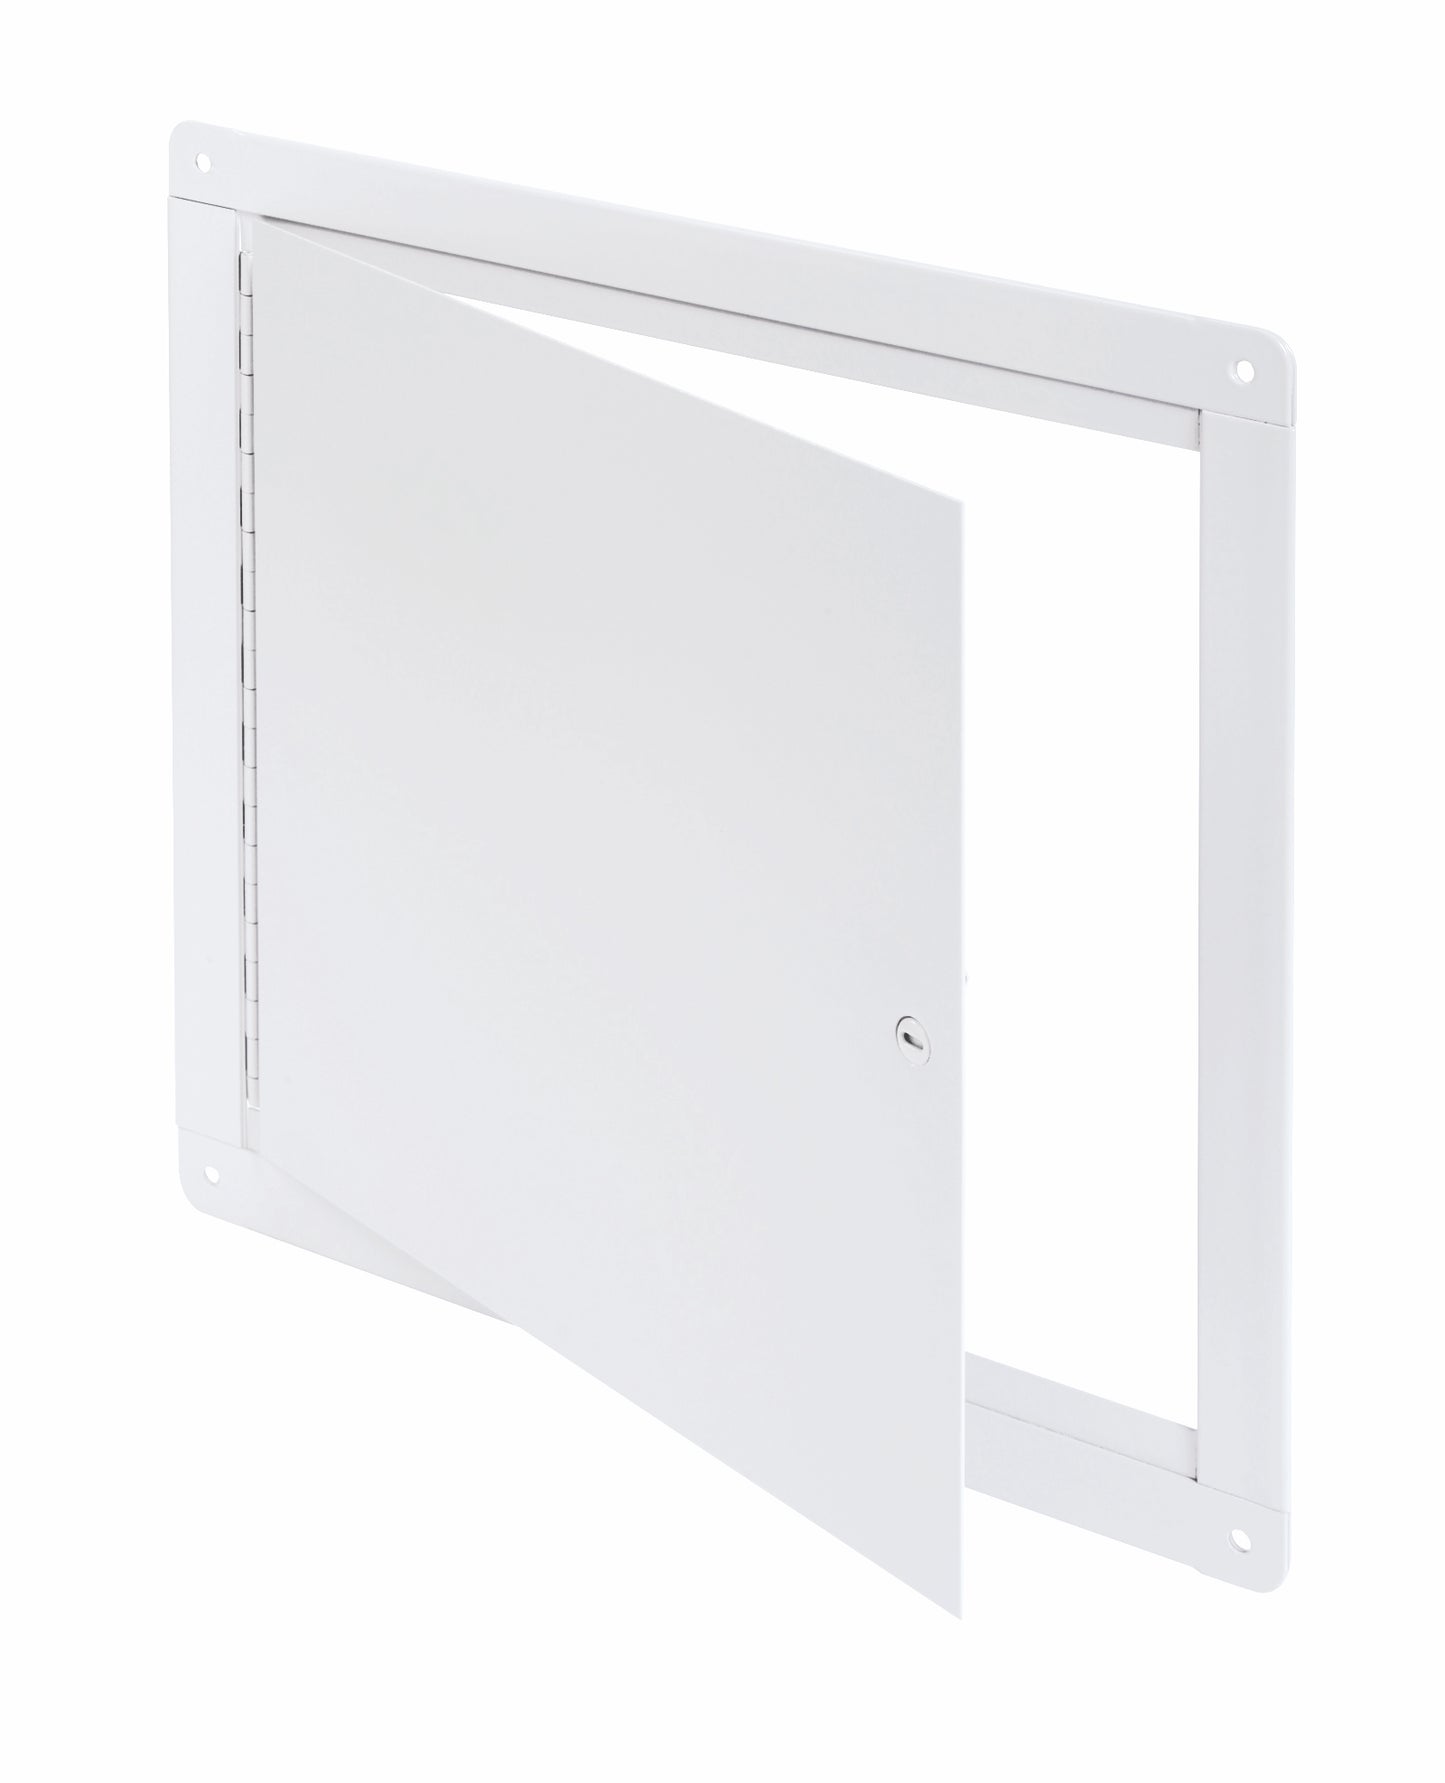 24"x24" Flush Universal Surface Mounted Access Door with Exposed Flange, Cendrex